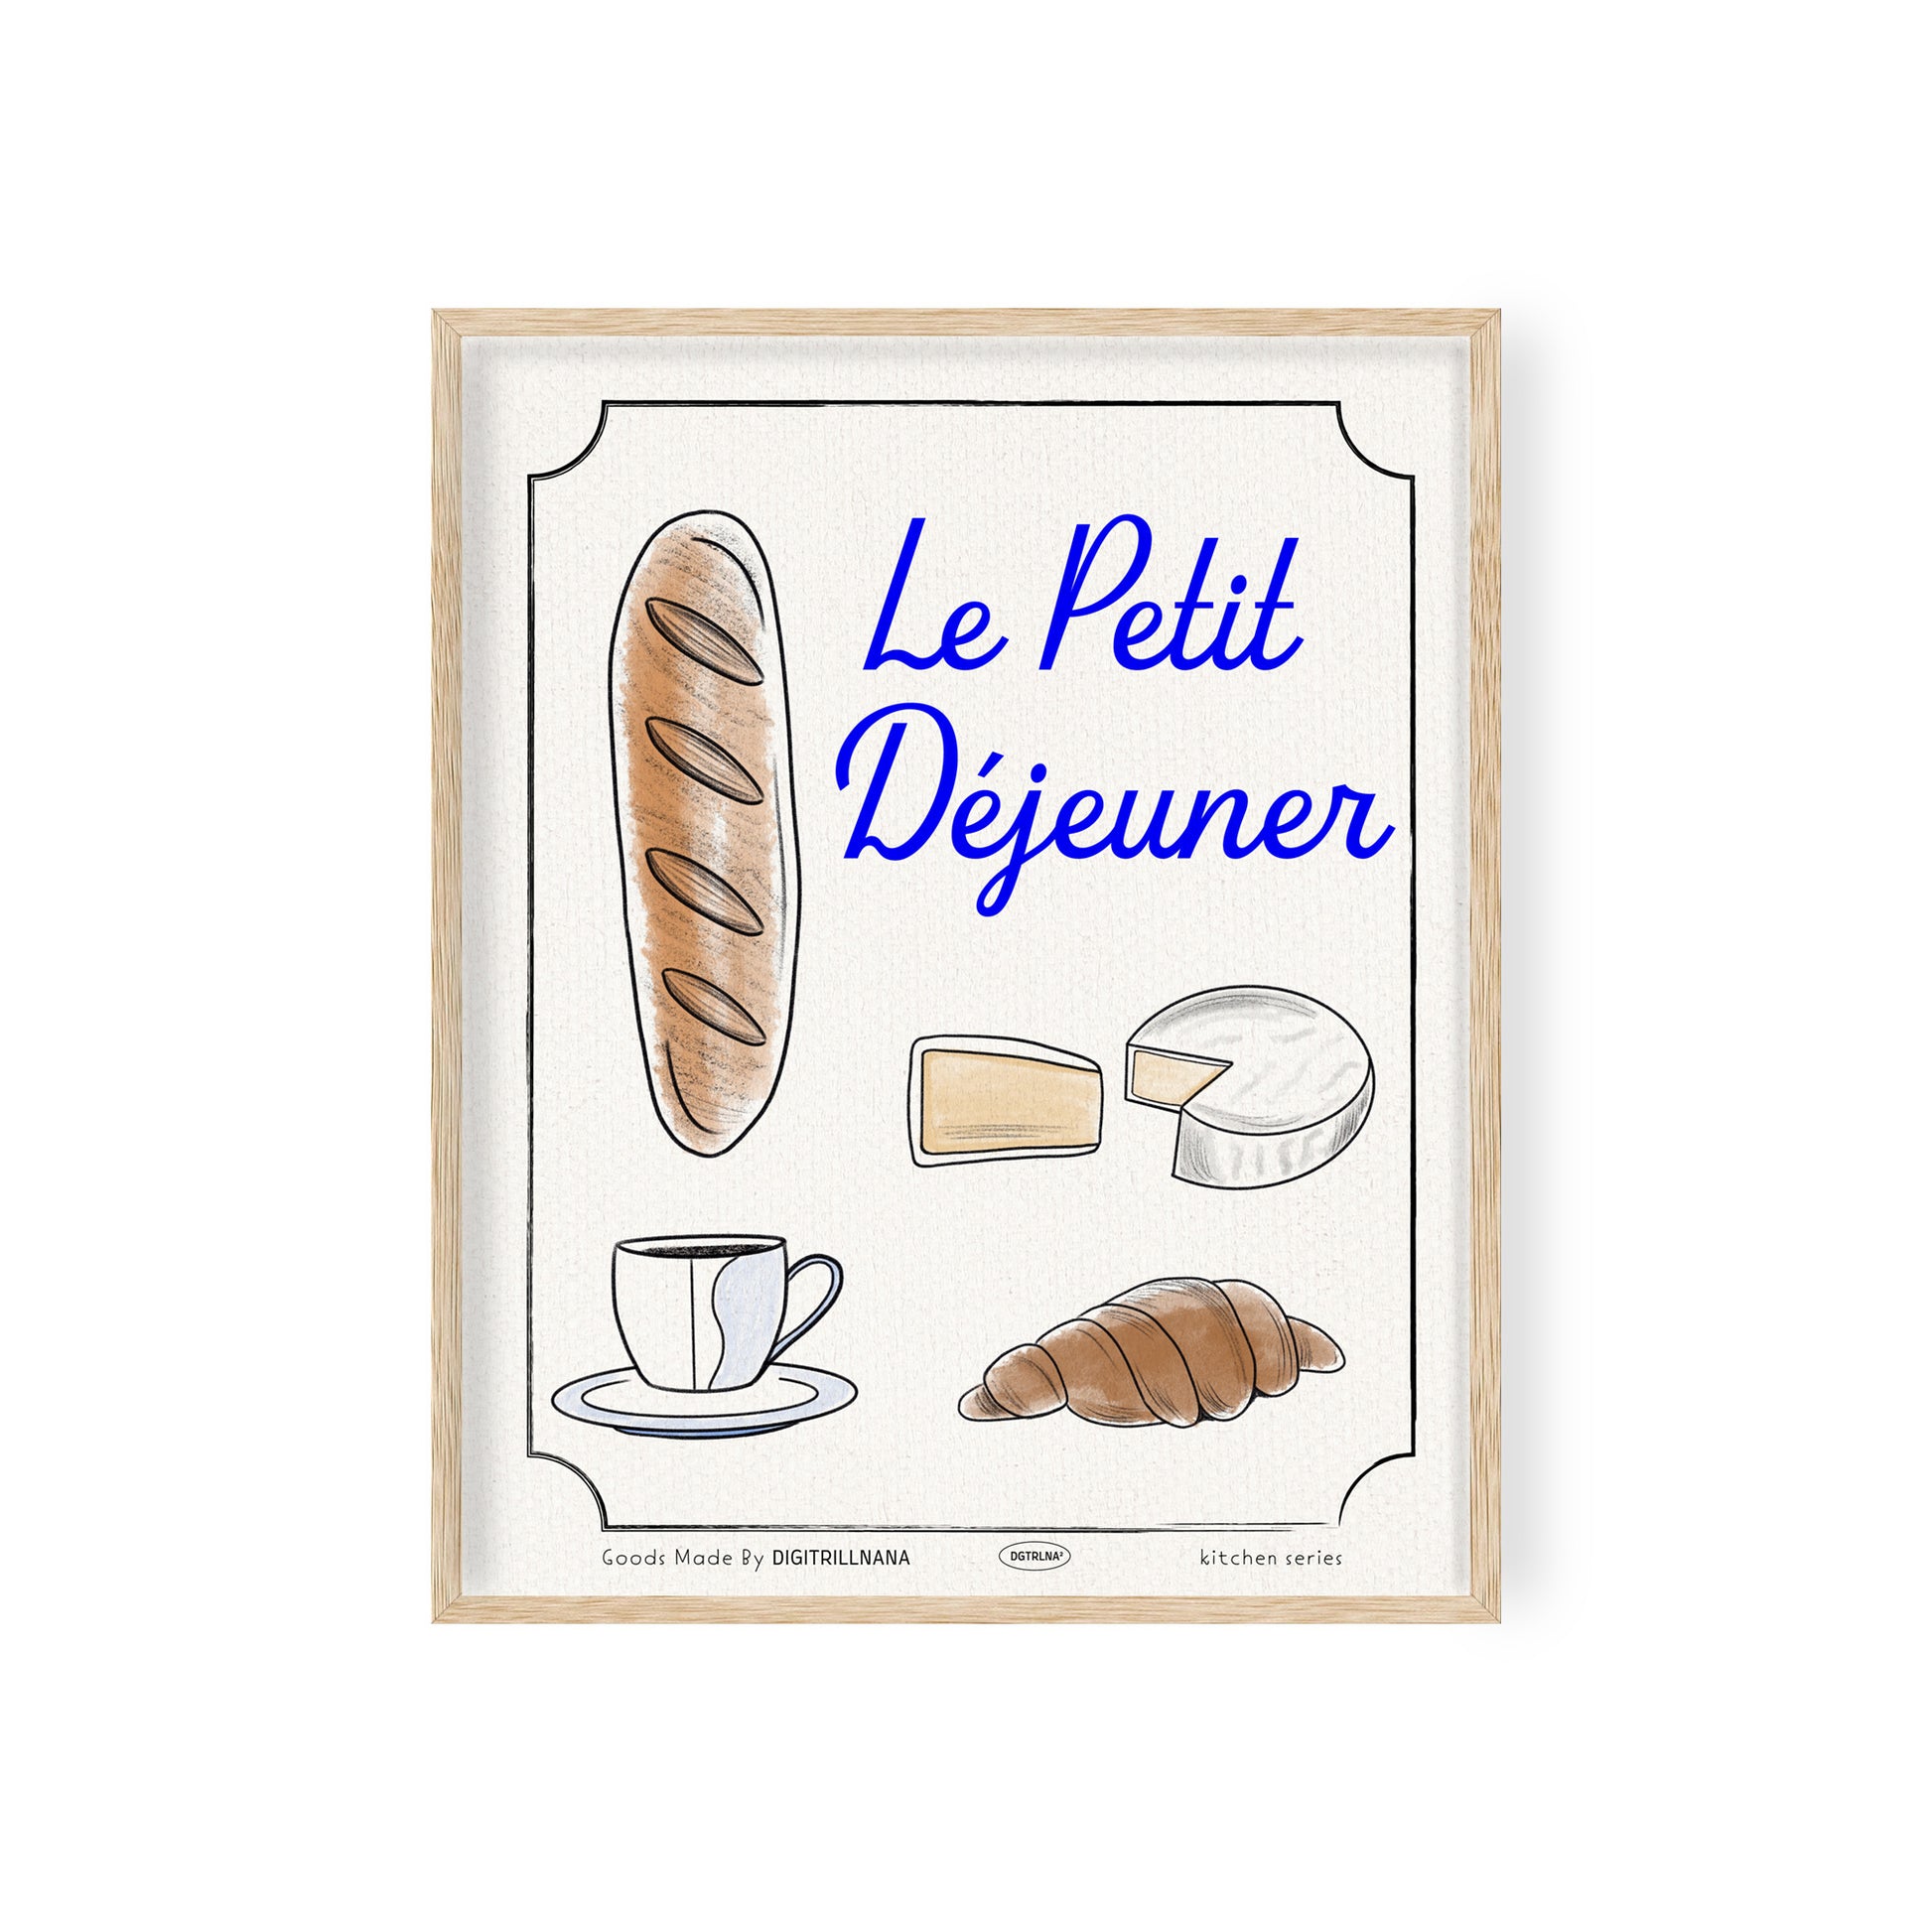 Le Petit Déjeuner French Food Illustration 8x10" and 18x24" art print from Goods Made By Digitrillnana, Ashley Fletcher. Vintage, rustic, kitchen illustration of croissant, coffee, cheese, and french bread. Perfect for home decor, wall art, art prints, and more!